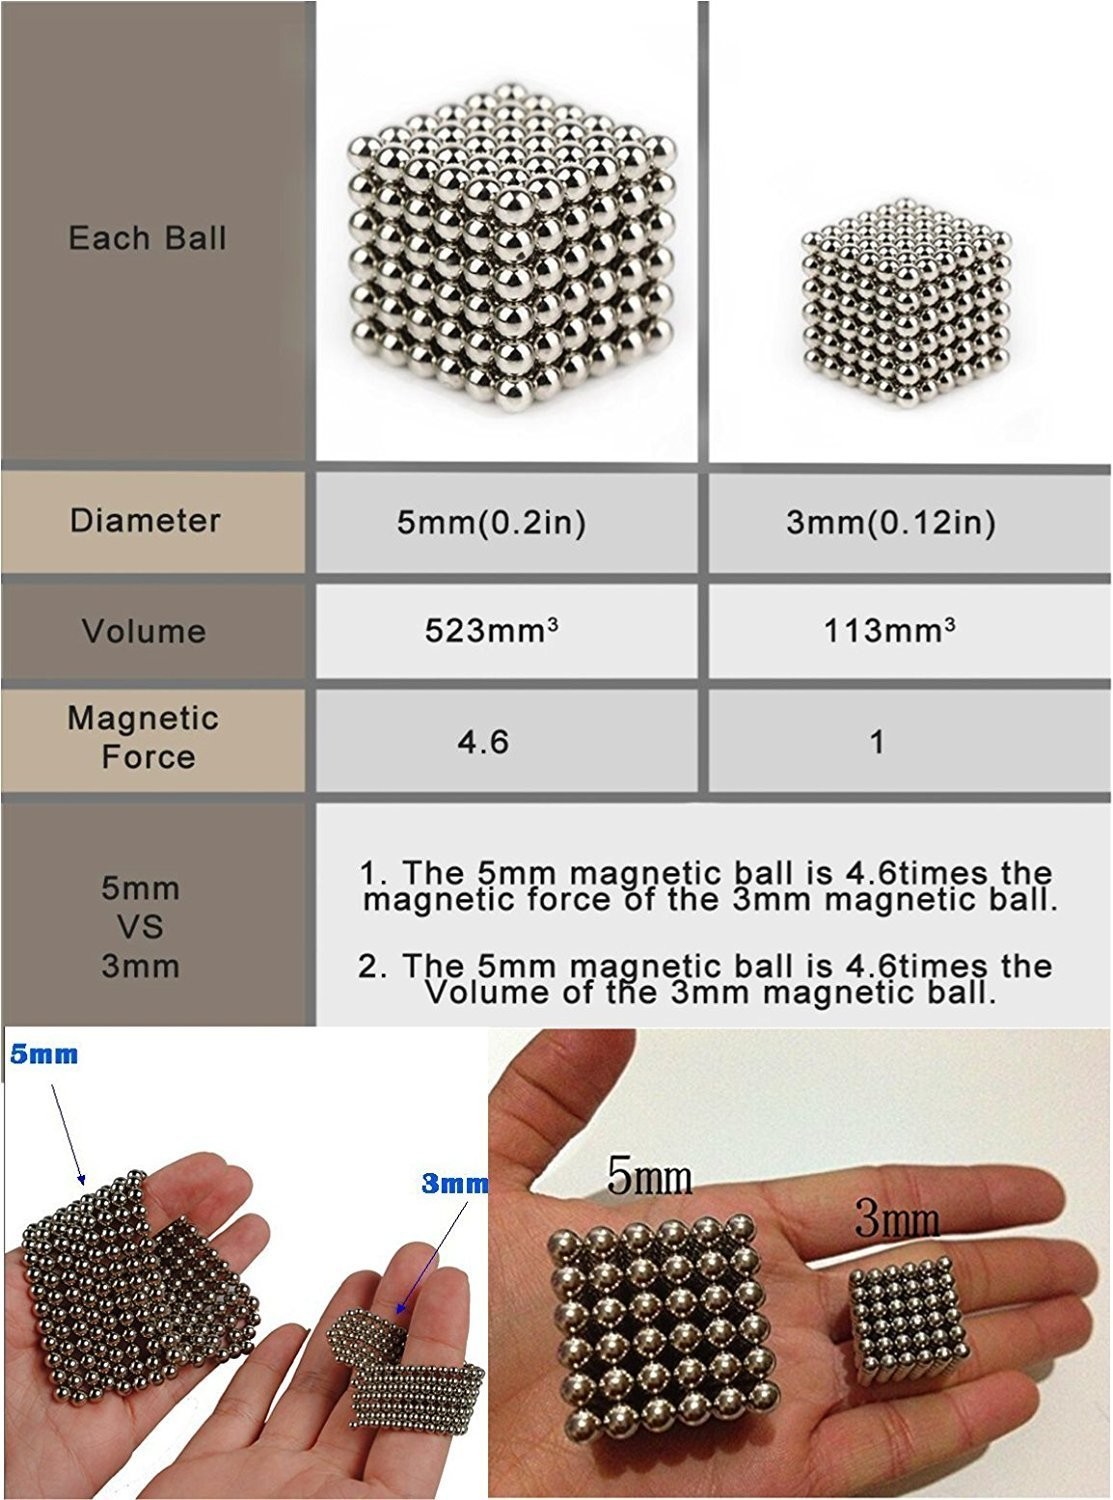 1000 buckyballs for sale